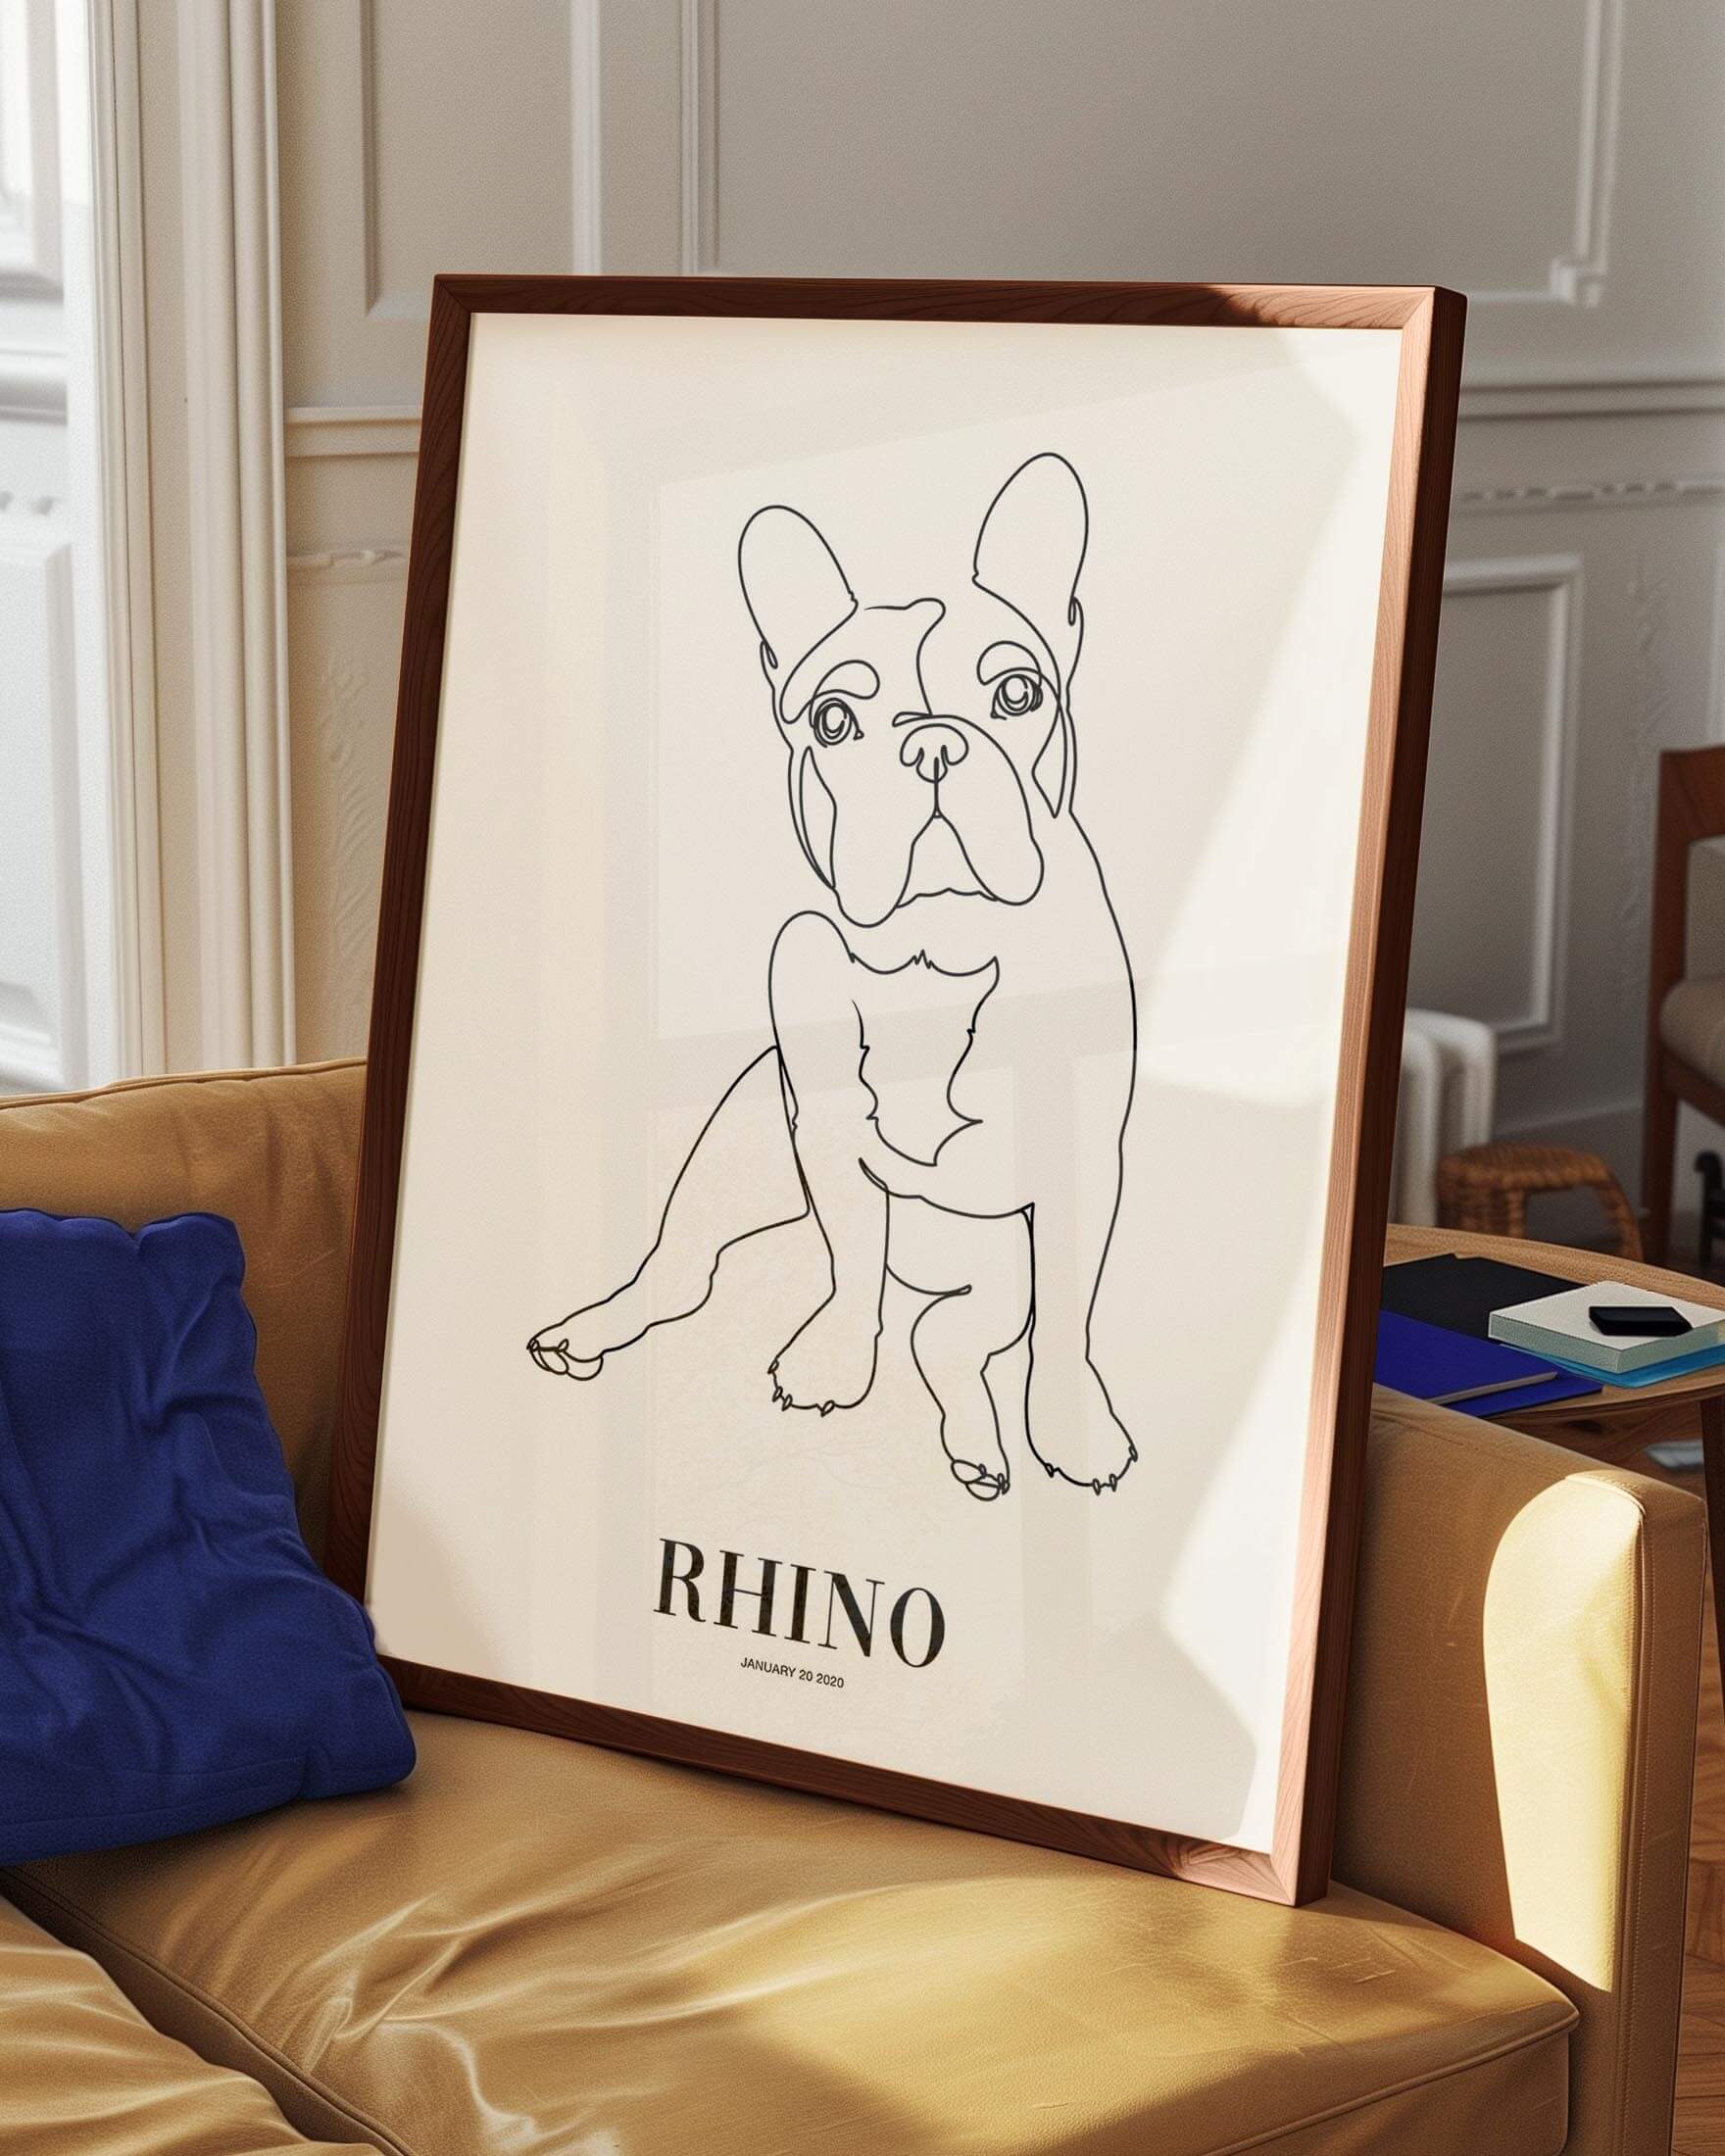 custom dog drawing line art in living room by vogue paws who specialize in personalized pet portraits for the home and gift ideas like pet memorial tribute art or dog mom and dog dad pet parent gift ideas.